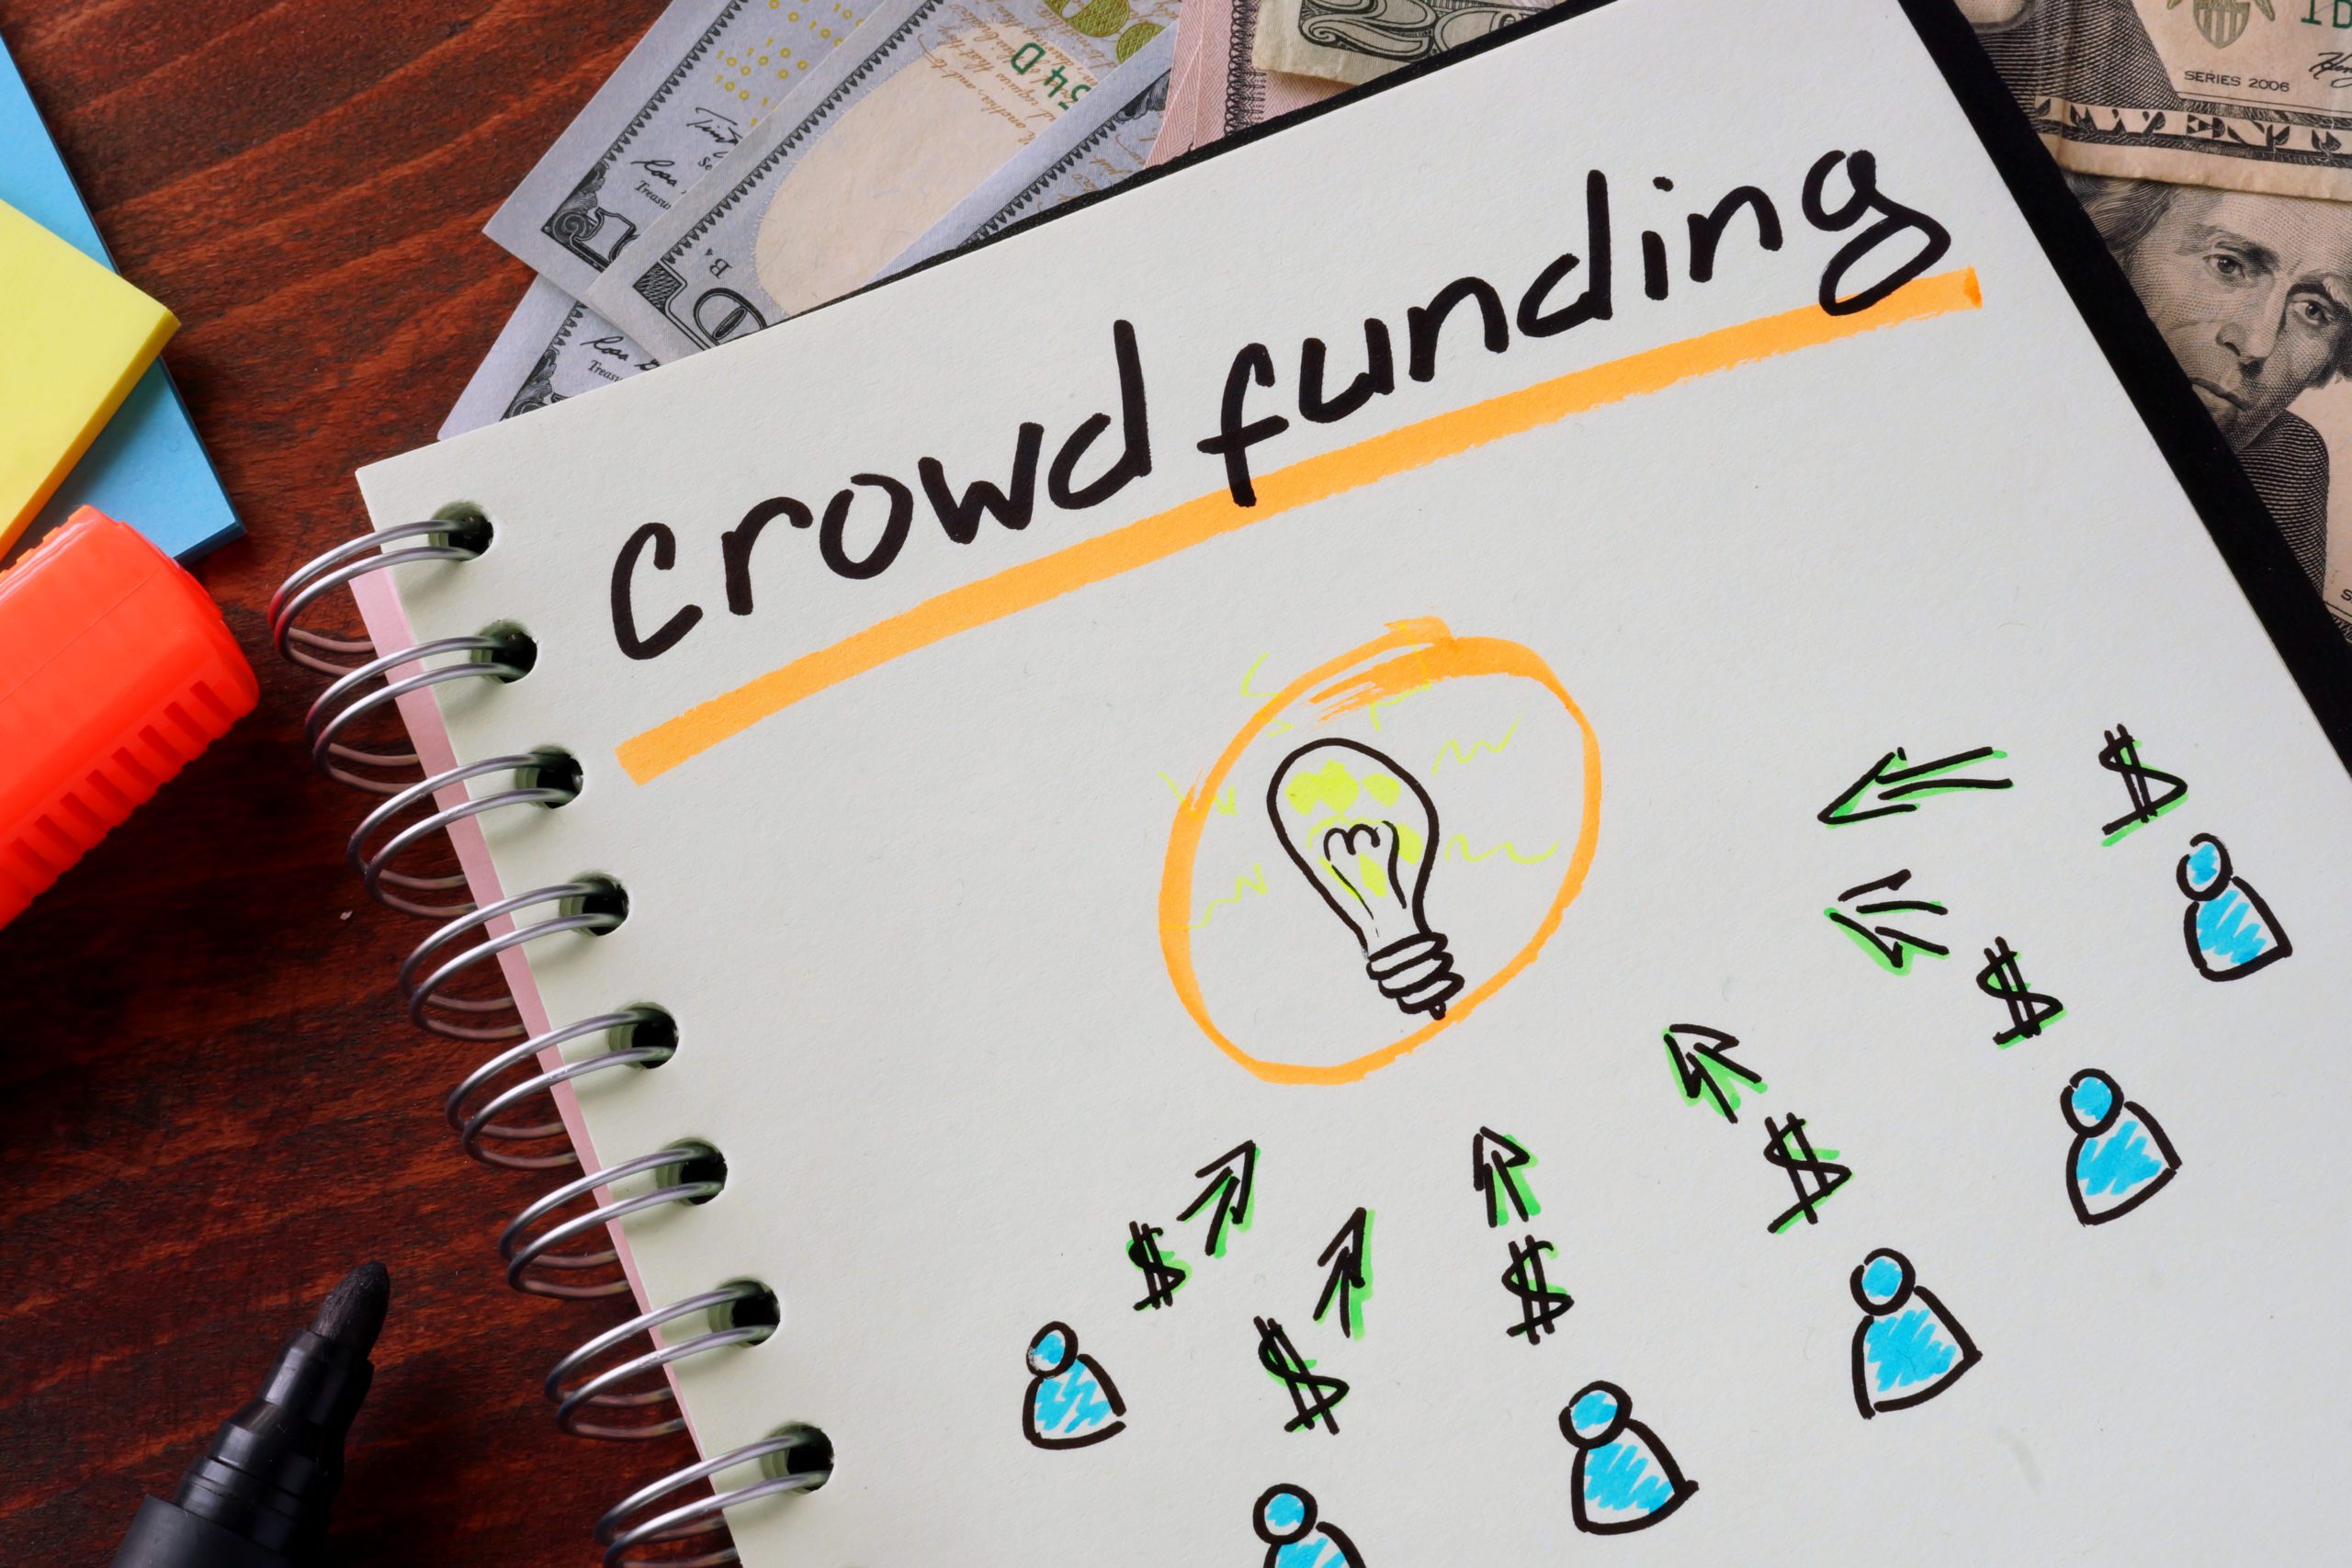 Crowdfunding vs. Other Loans: Which is Better?